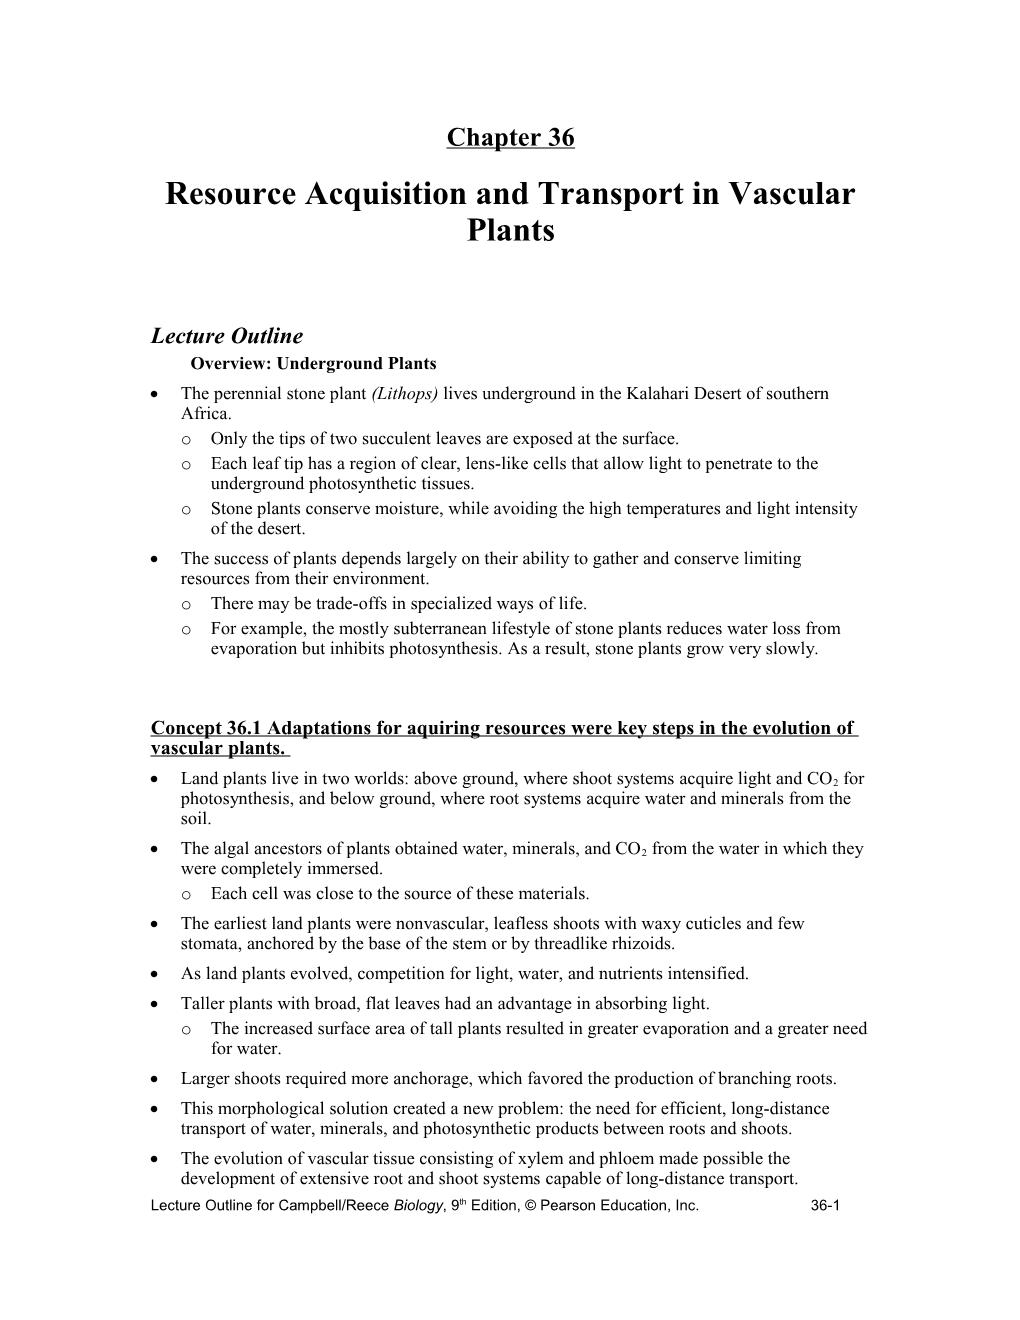 Resource Acquisition and Transport in Vascular Plants s1